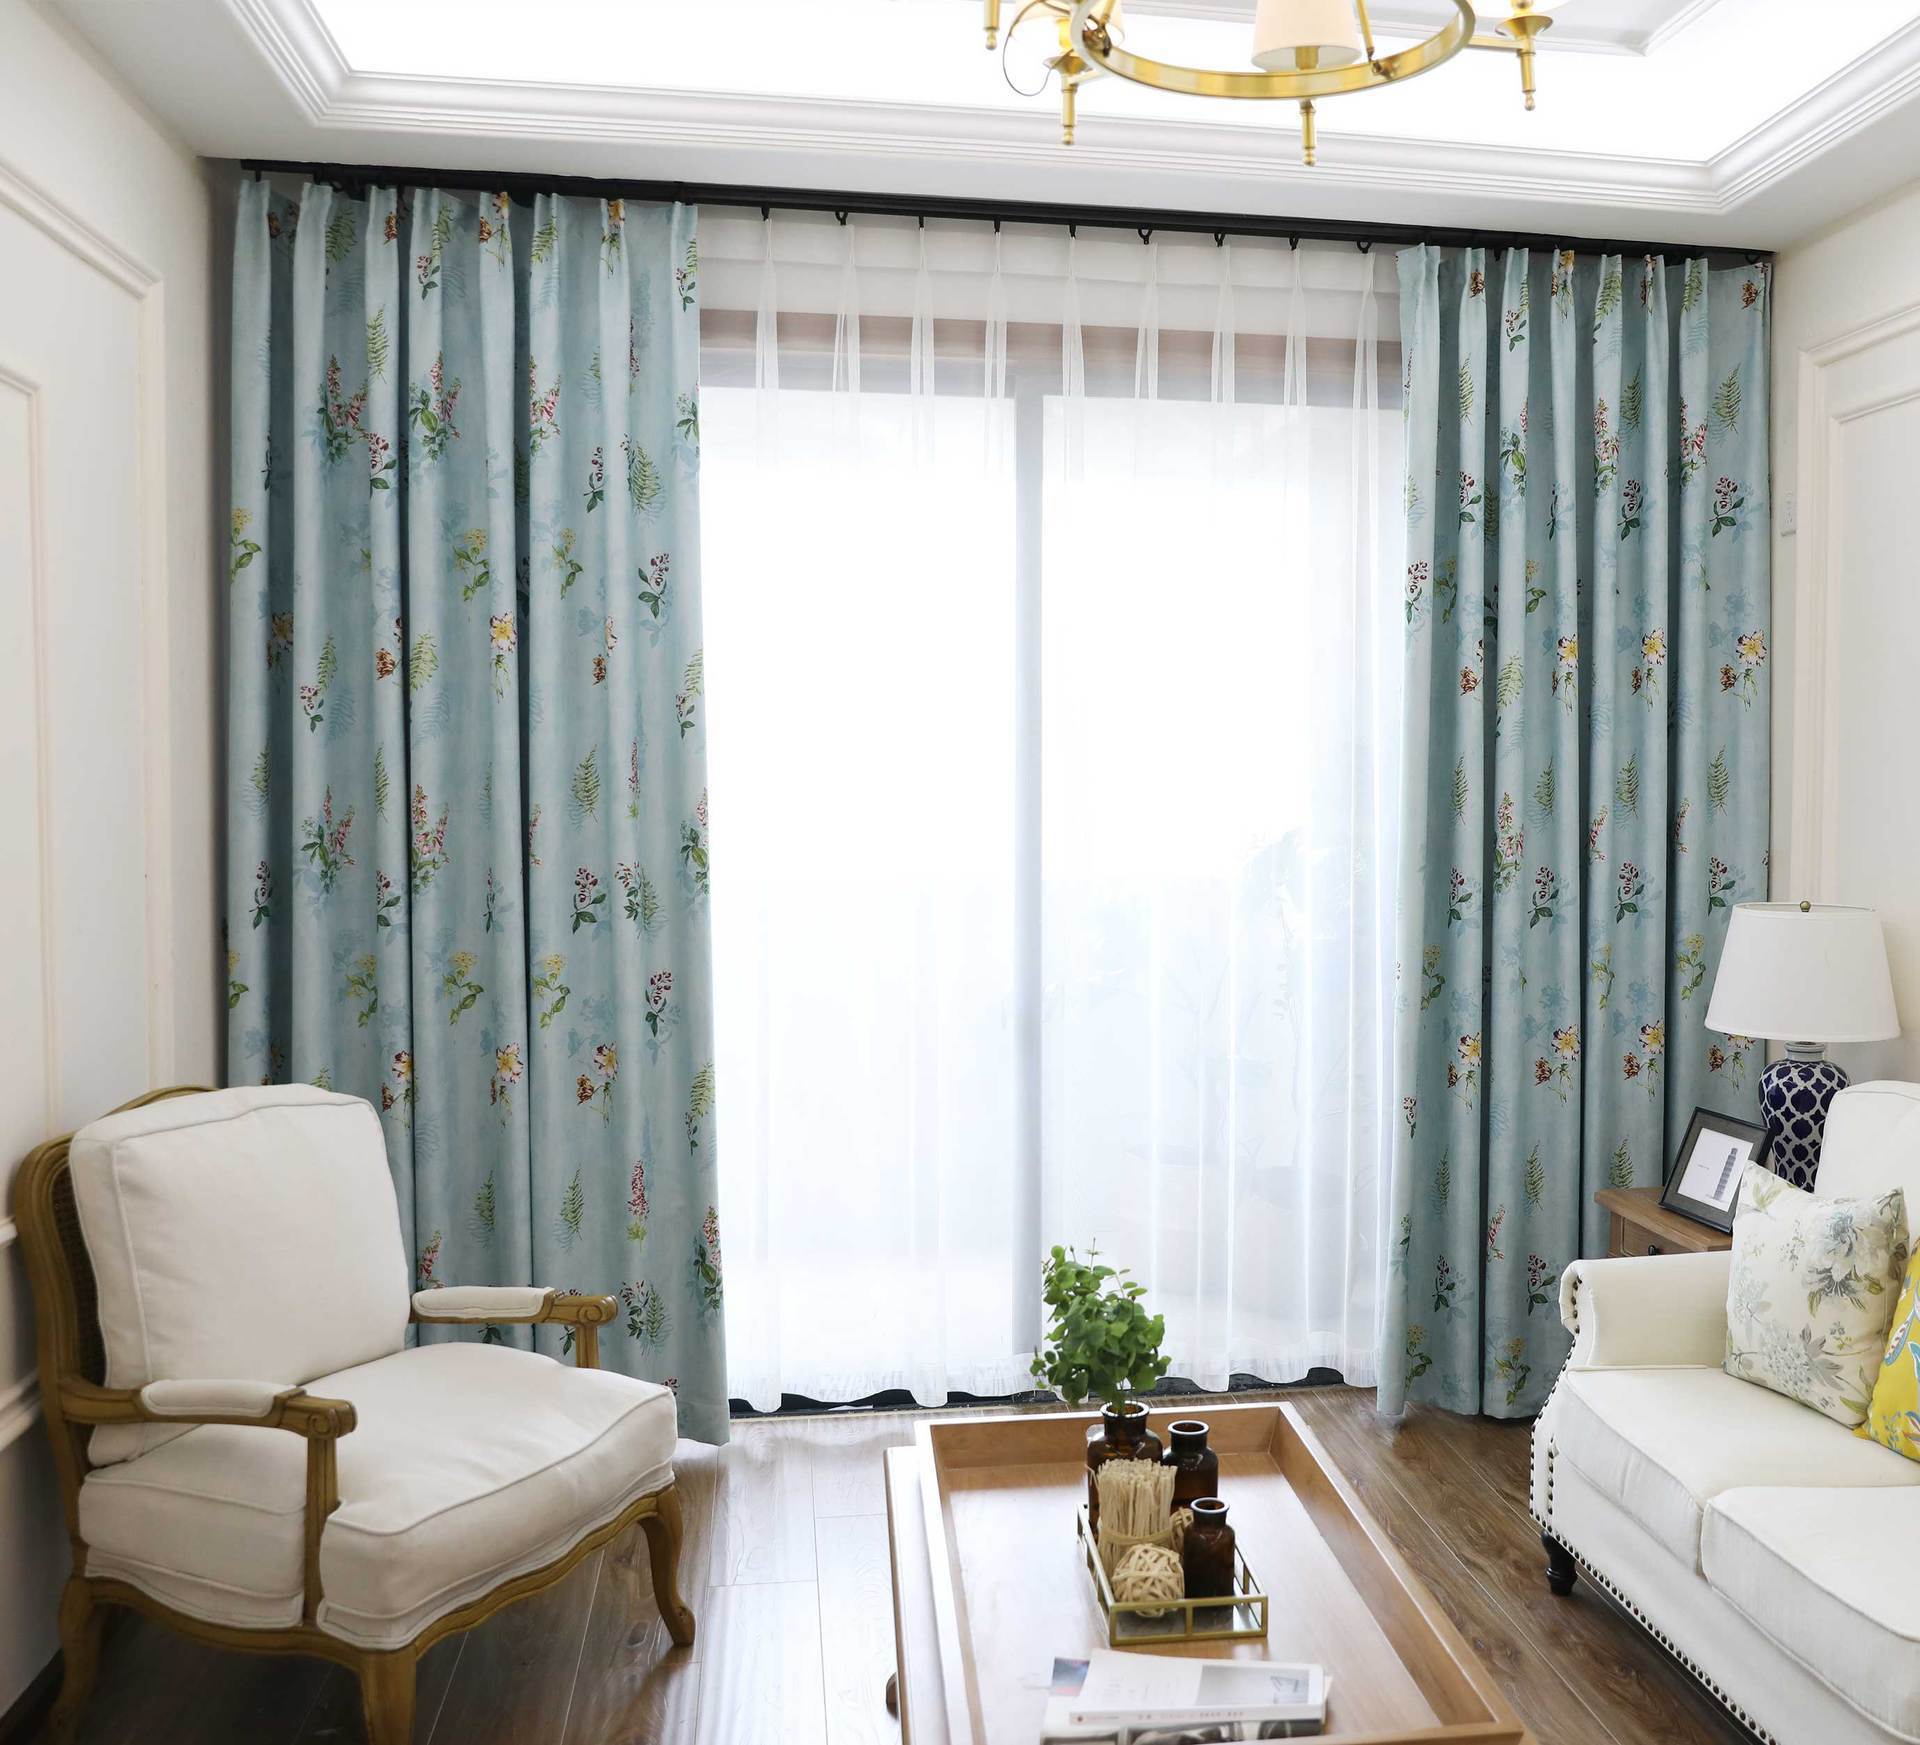 DIHINHOME Home Textile Pastoral Curtain Garden Printing Flower Blackout Curtains Window Drapes For Living Room